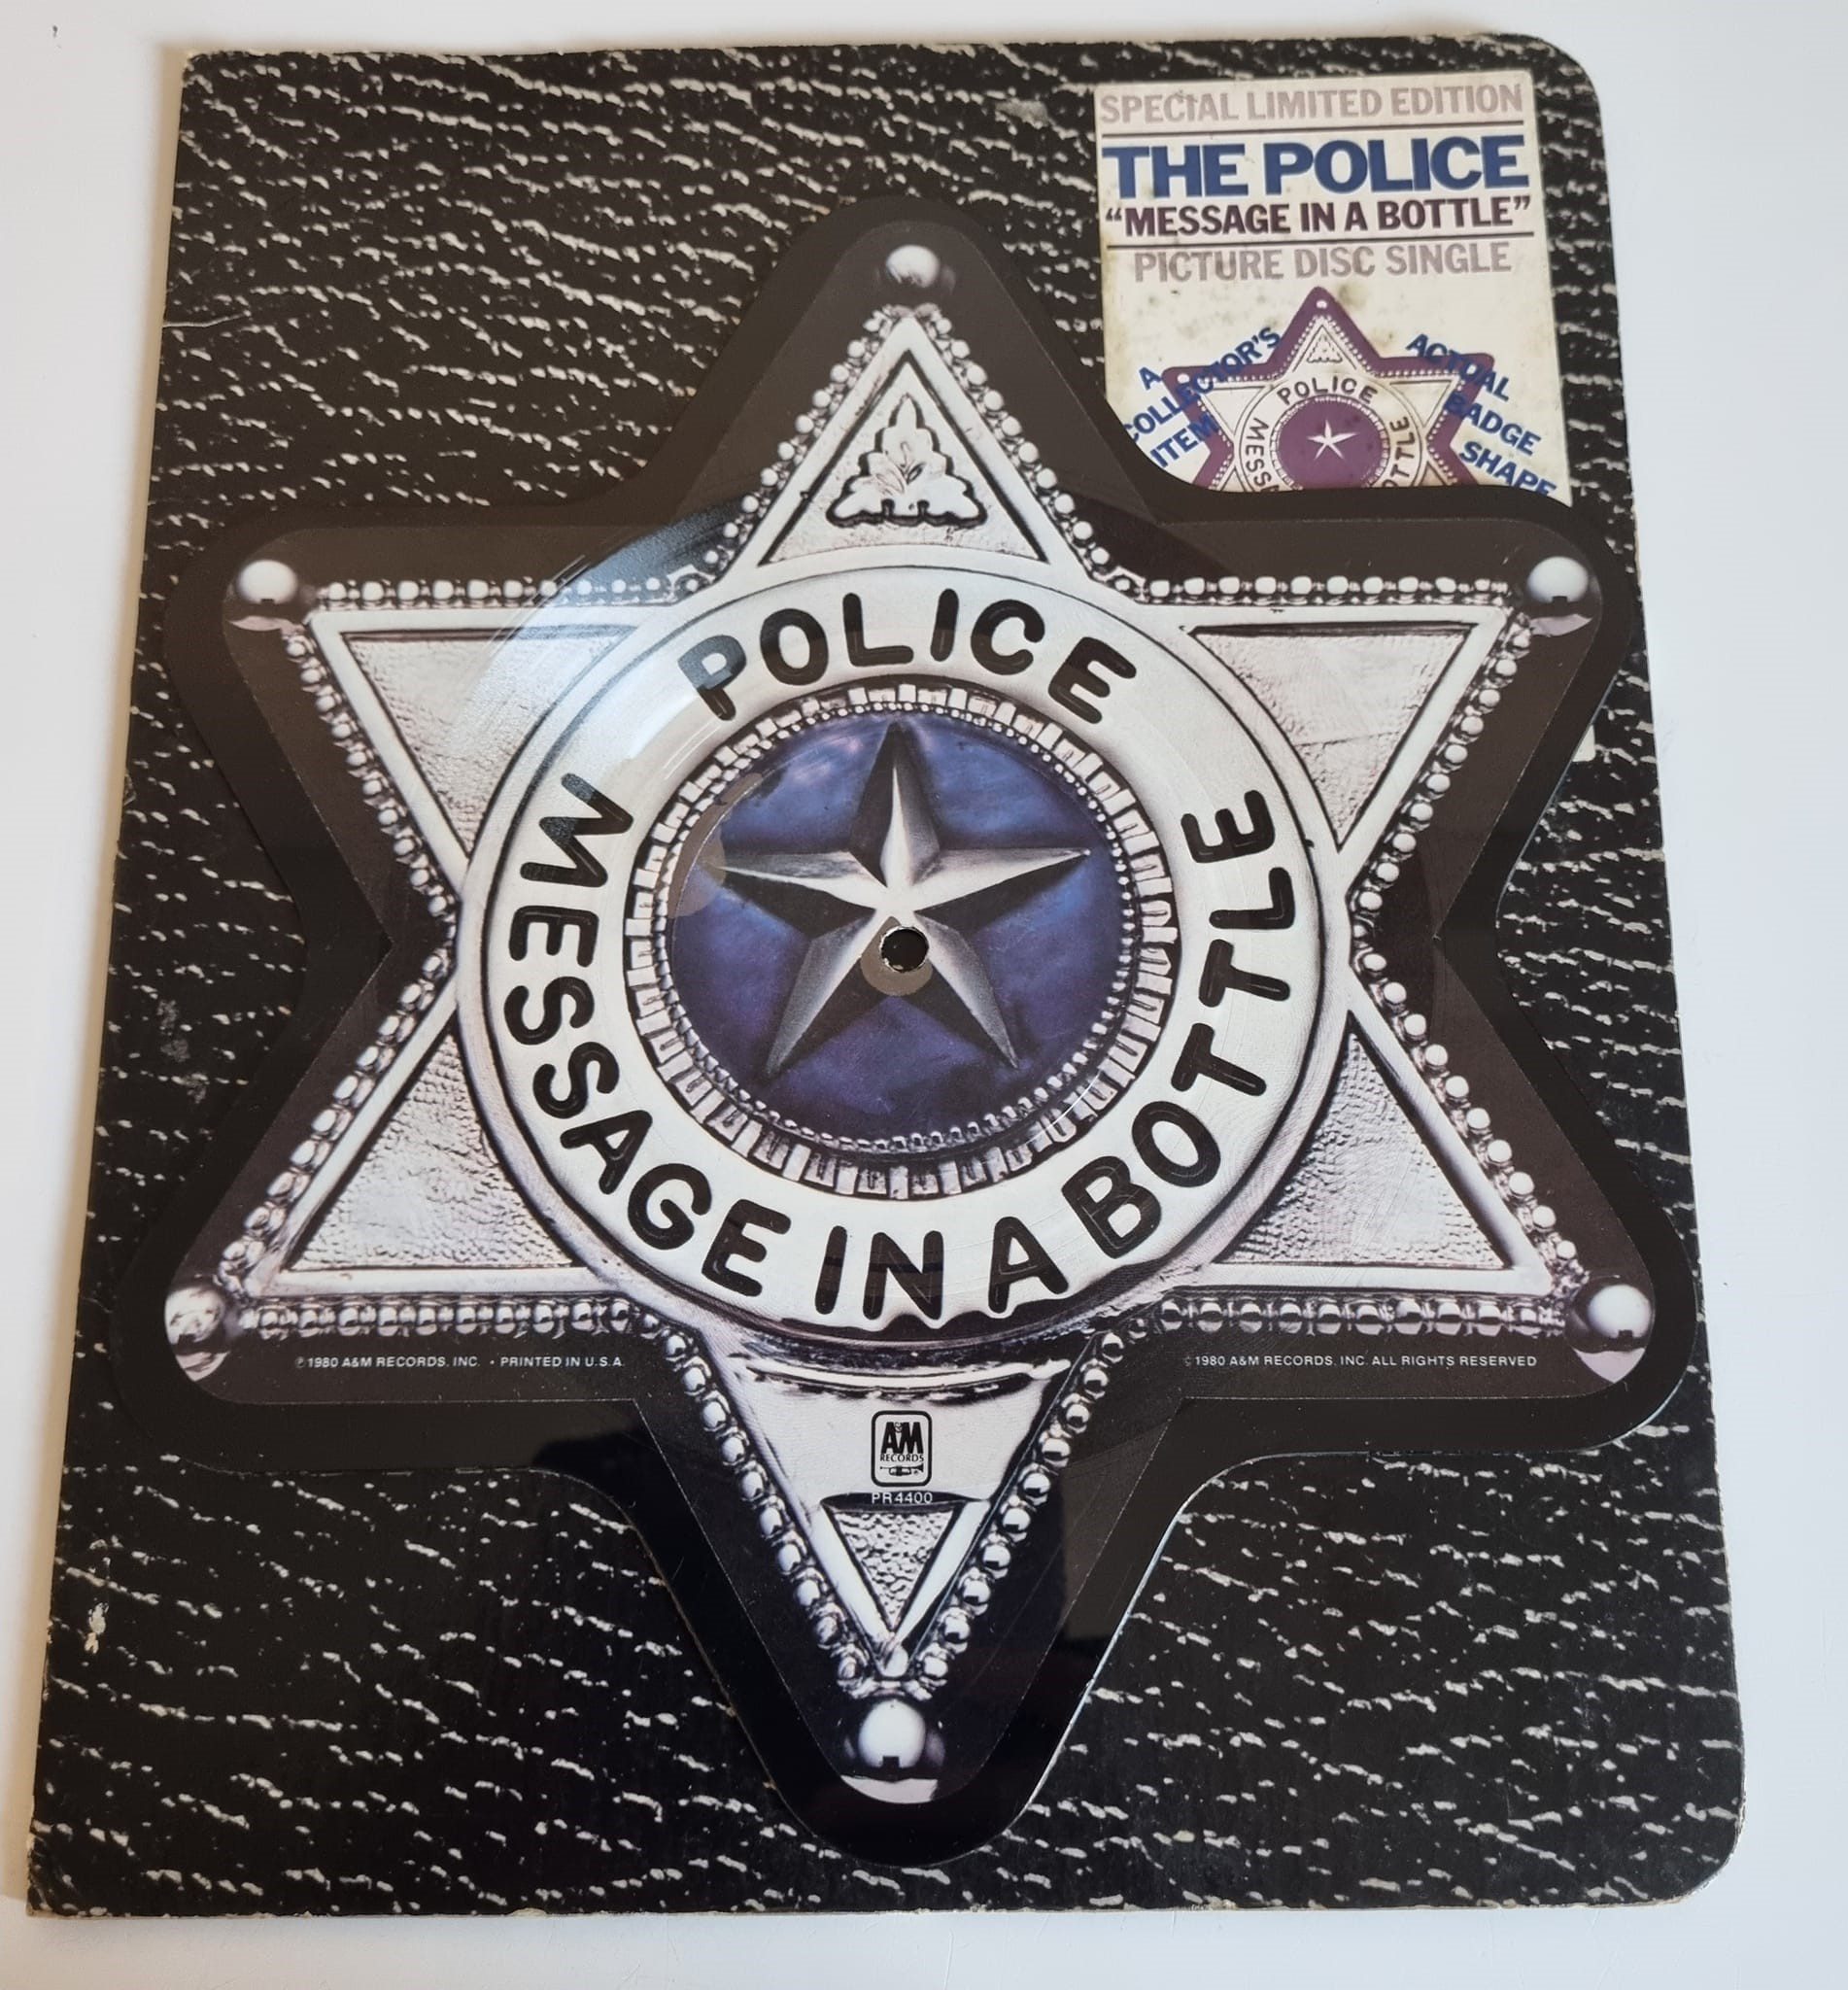 Buy this rare Police record by clicking here